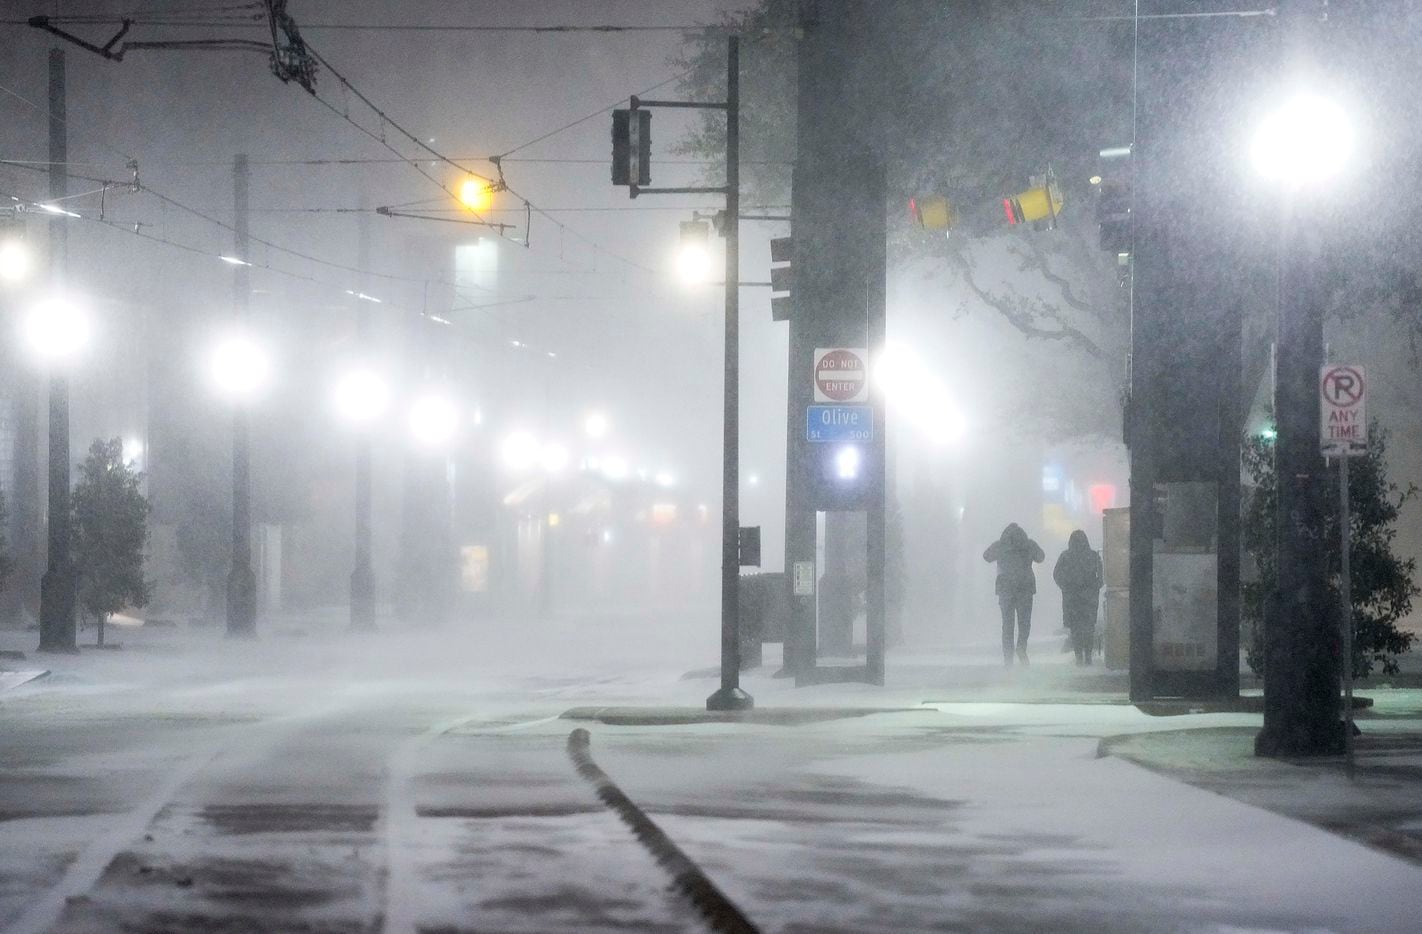 Blowing snow obscures people walking along Bryan Streen near the Pearl/Arts District station...